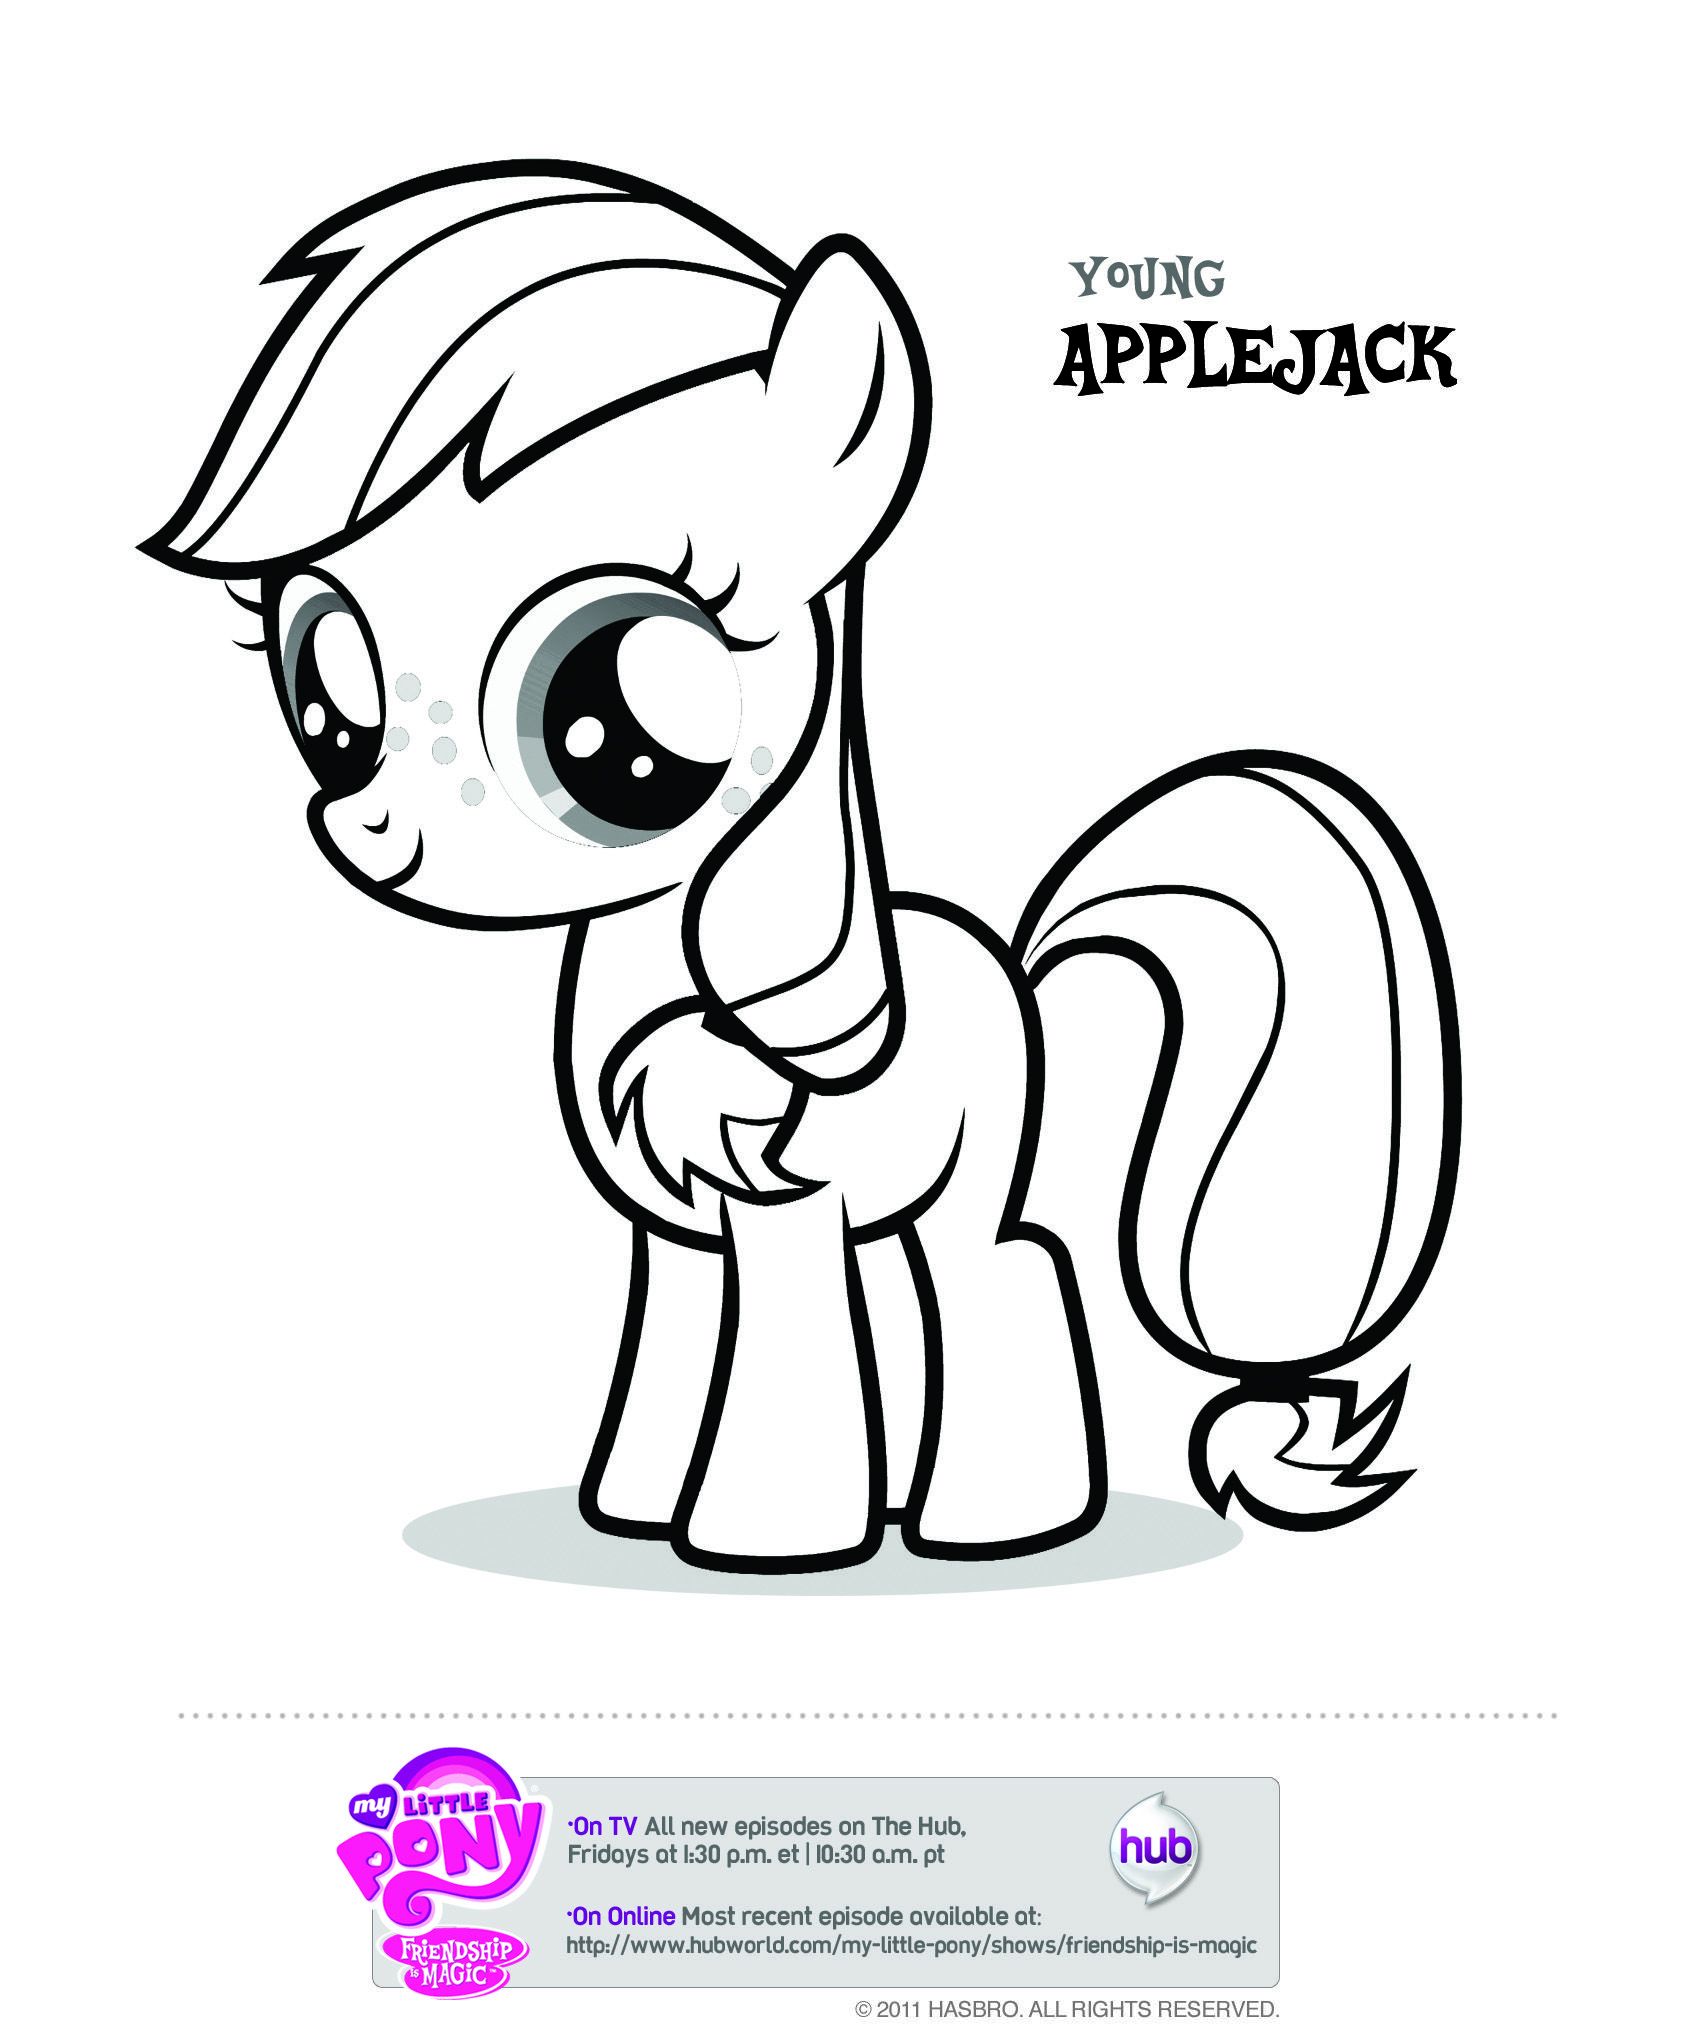 My Little Pony coloring pages for Ali.